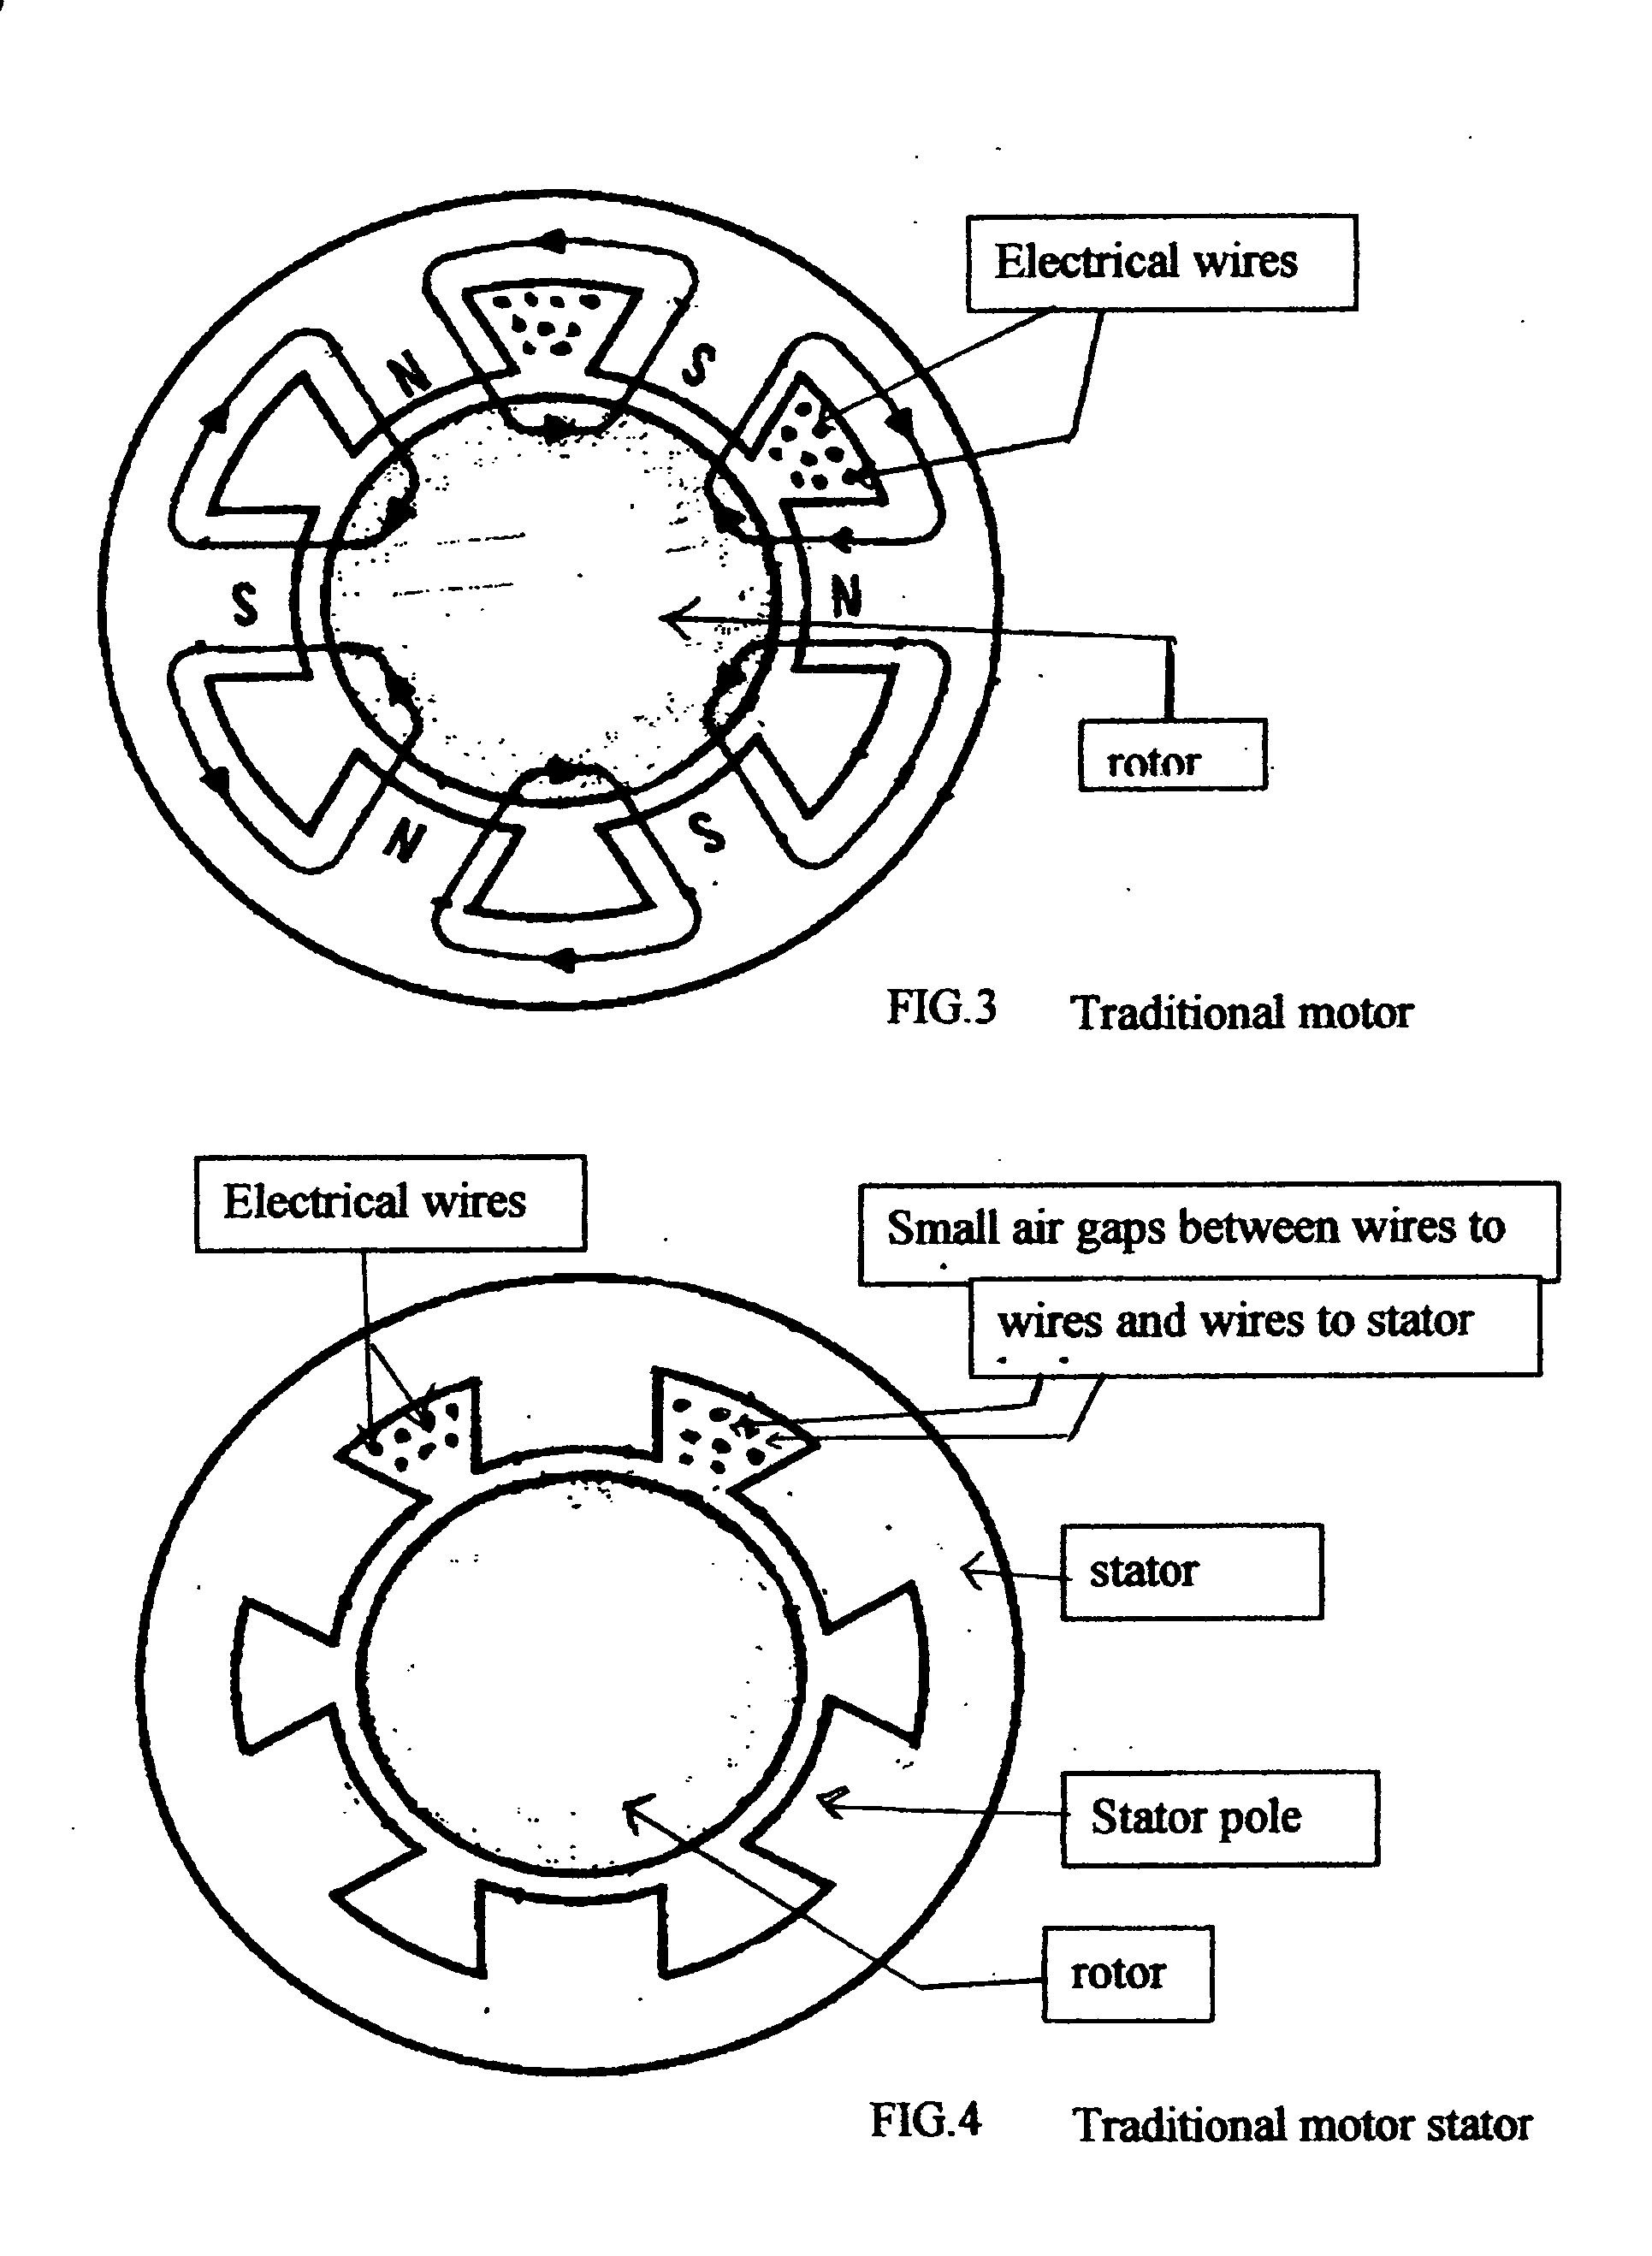 Mike 4001 design of the stator of electrical motor & generator